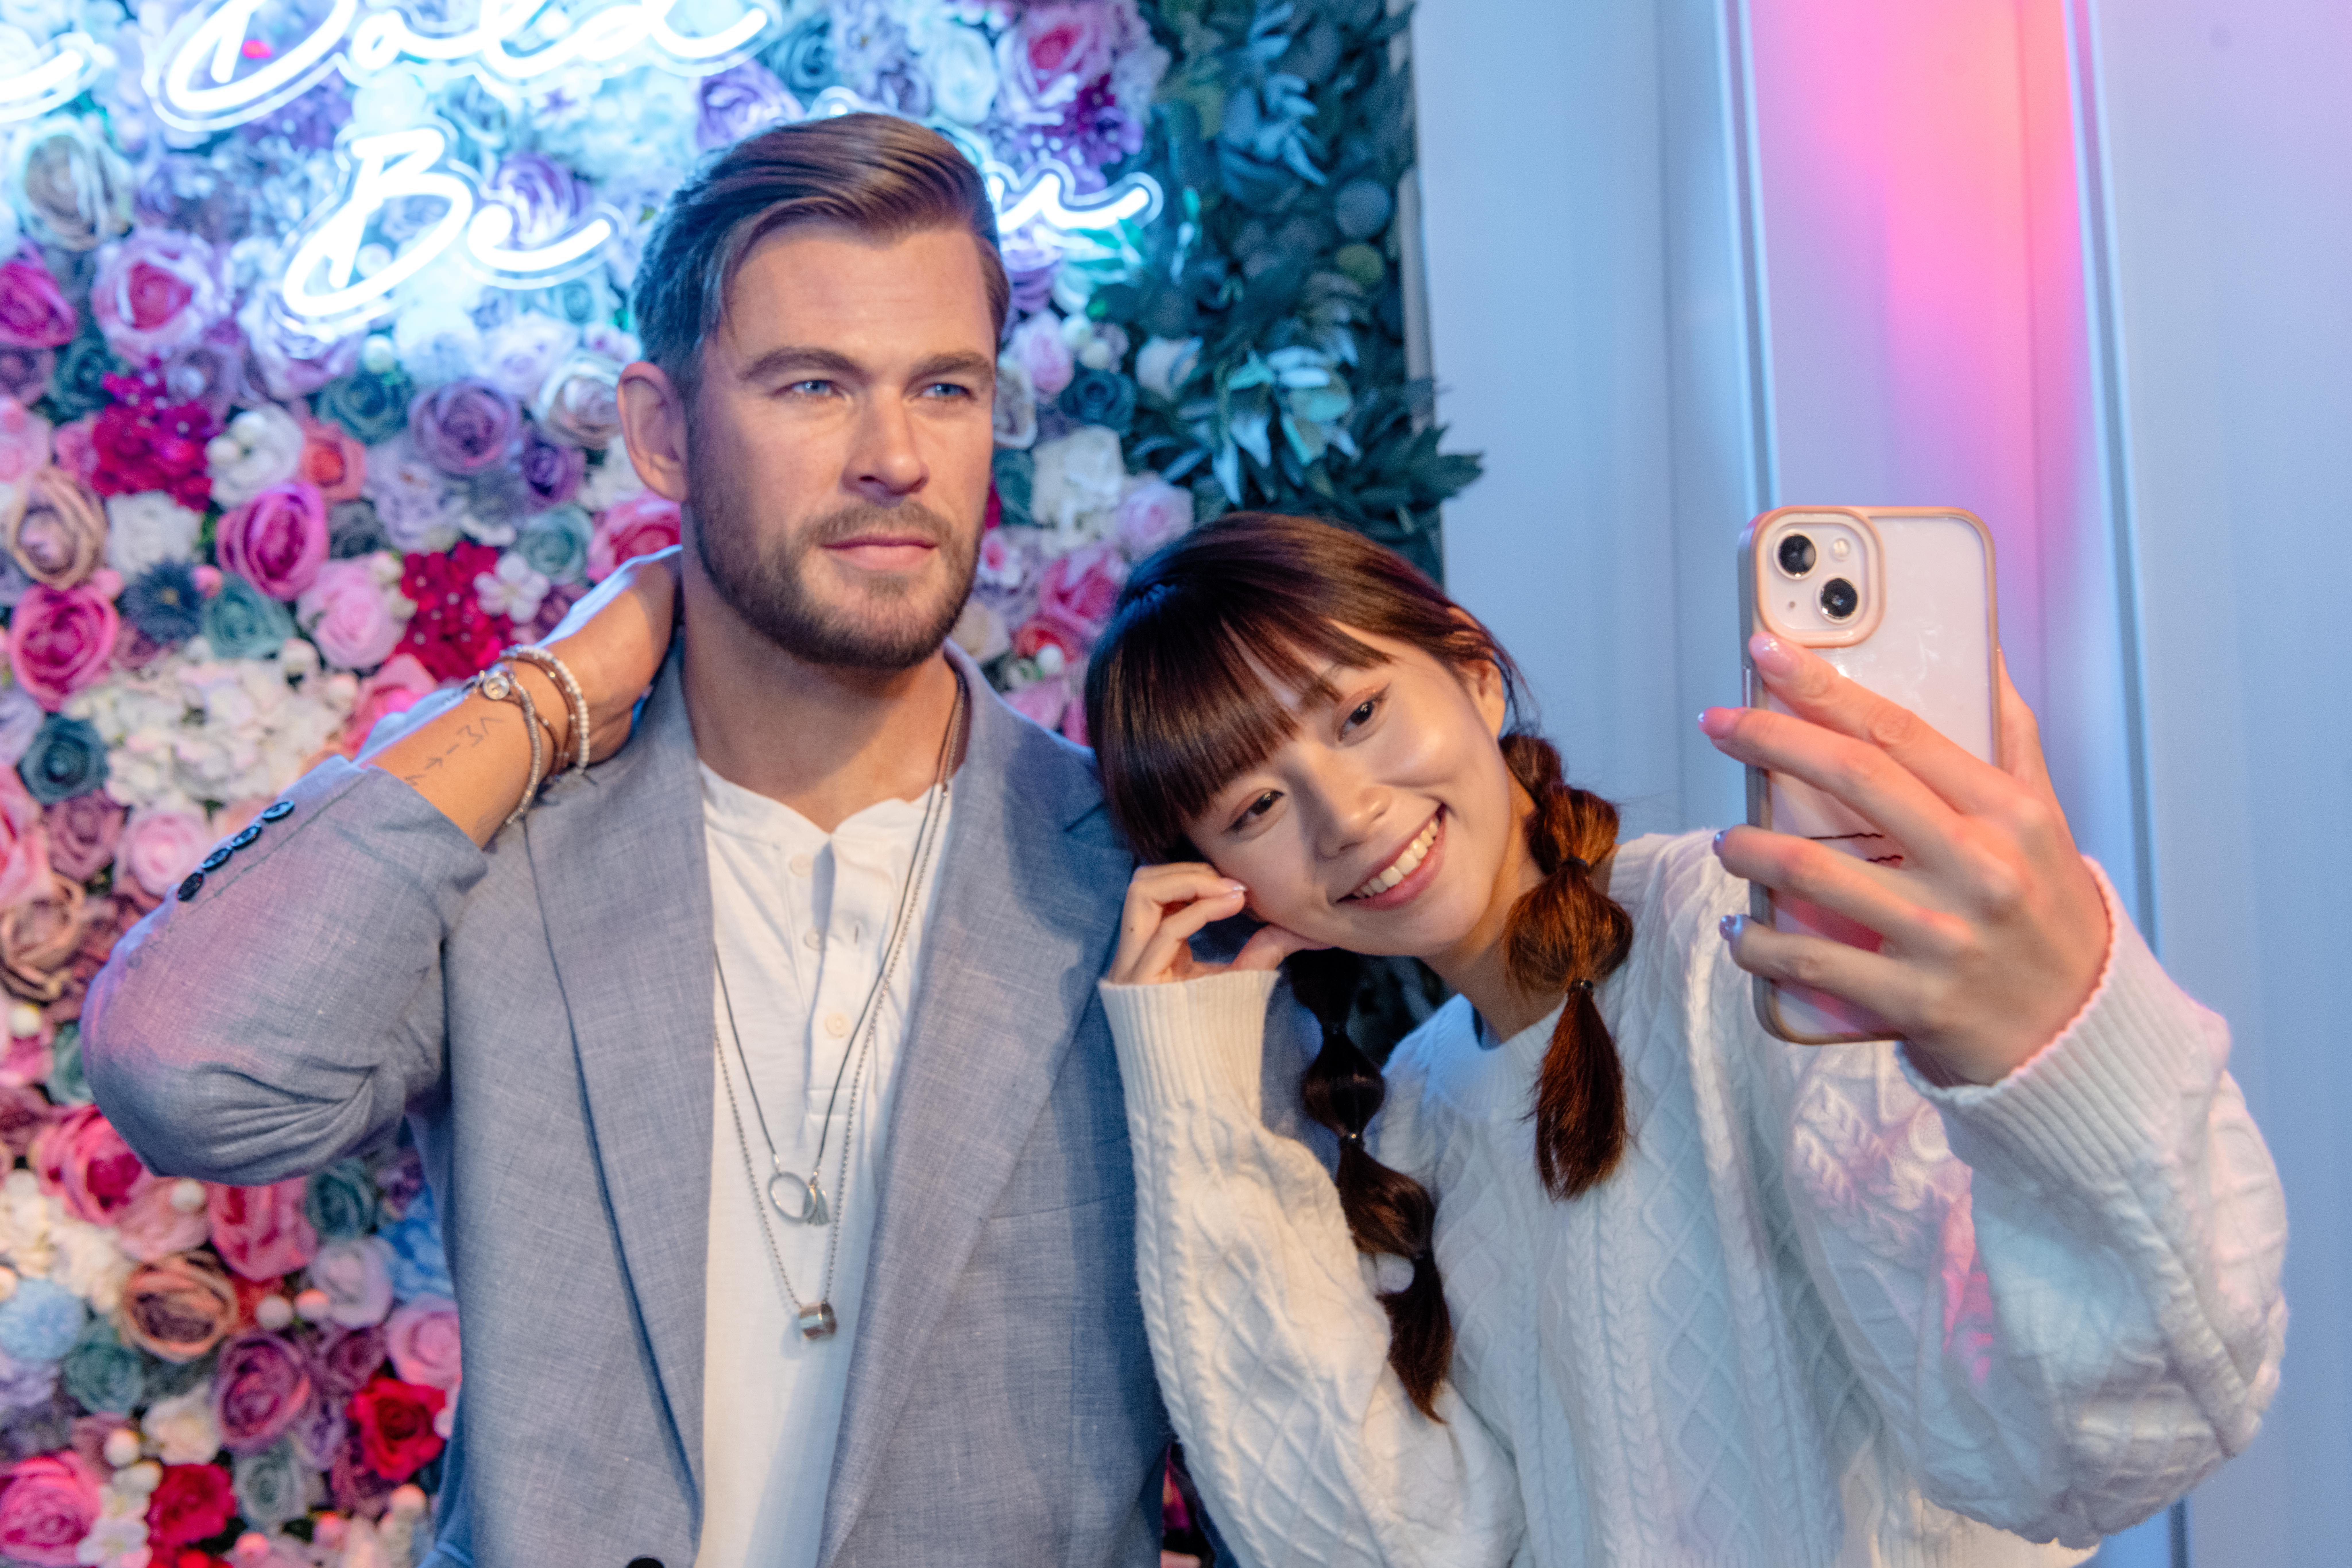 Chris Hemsworth wax figure in front of floral wall